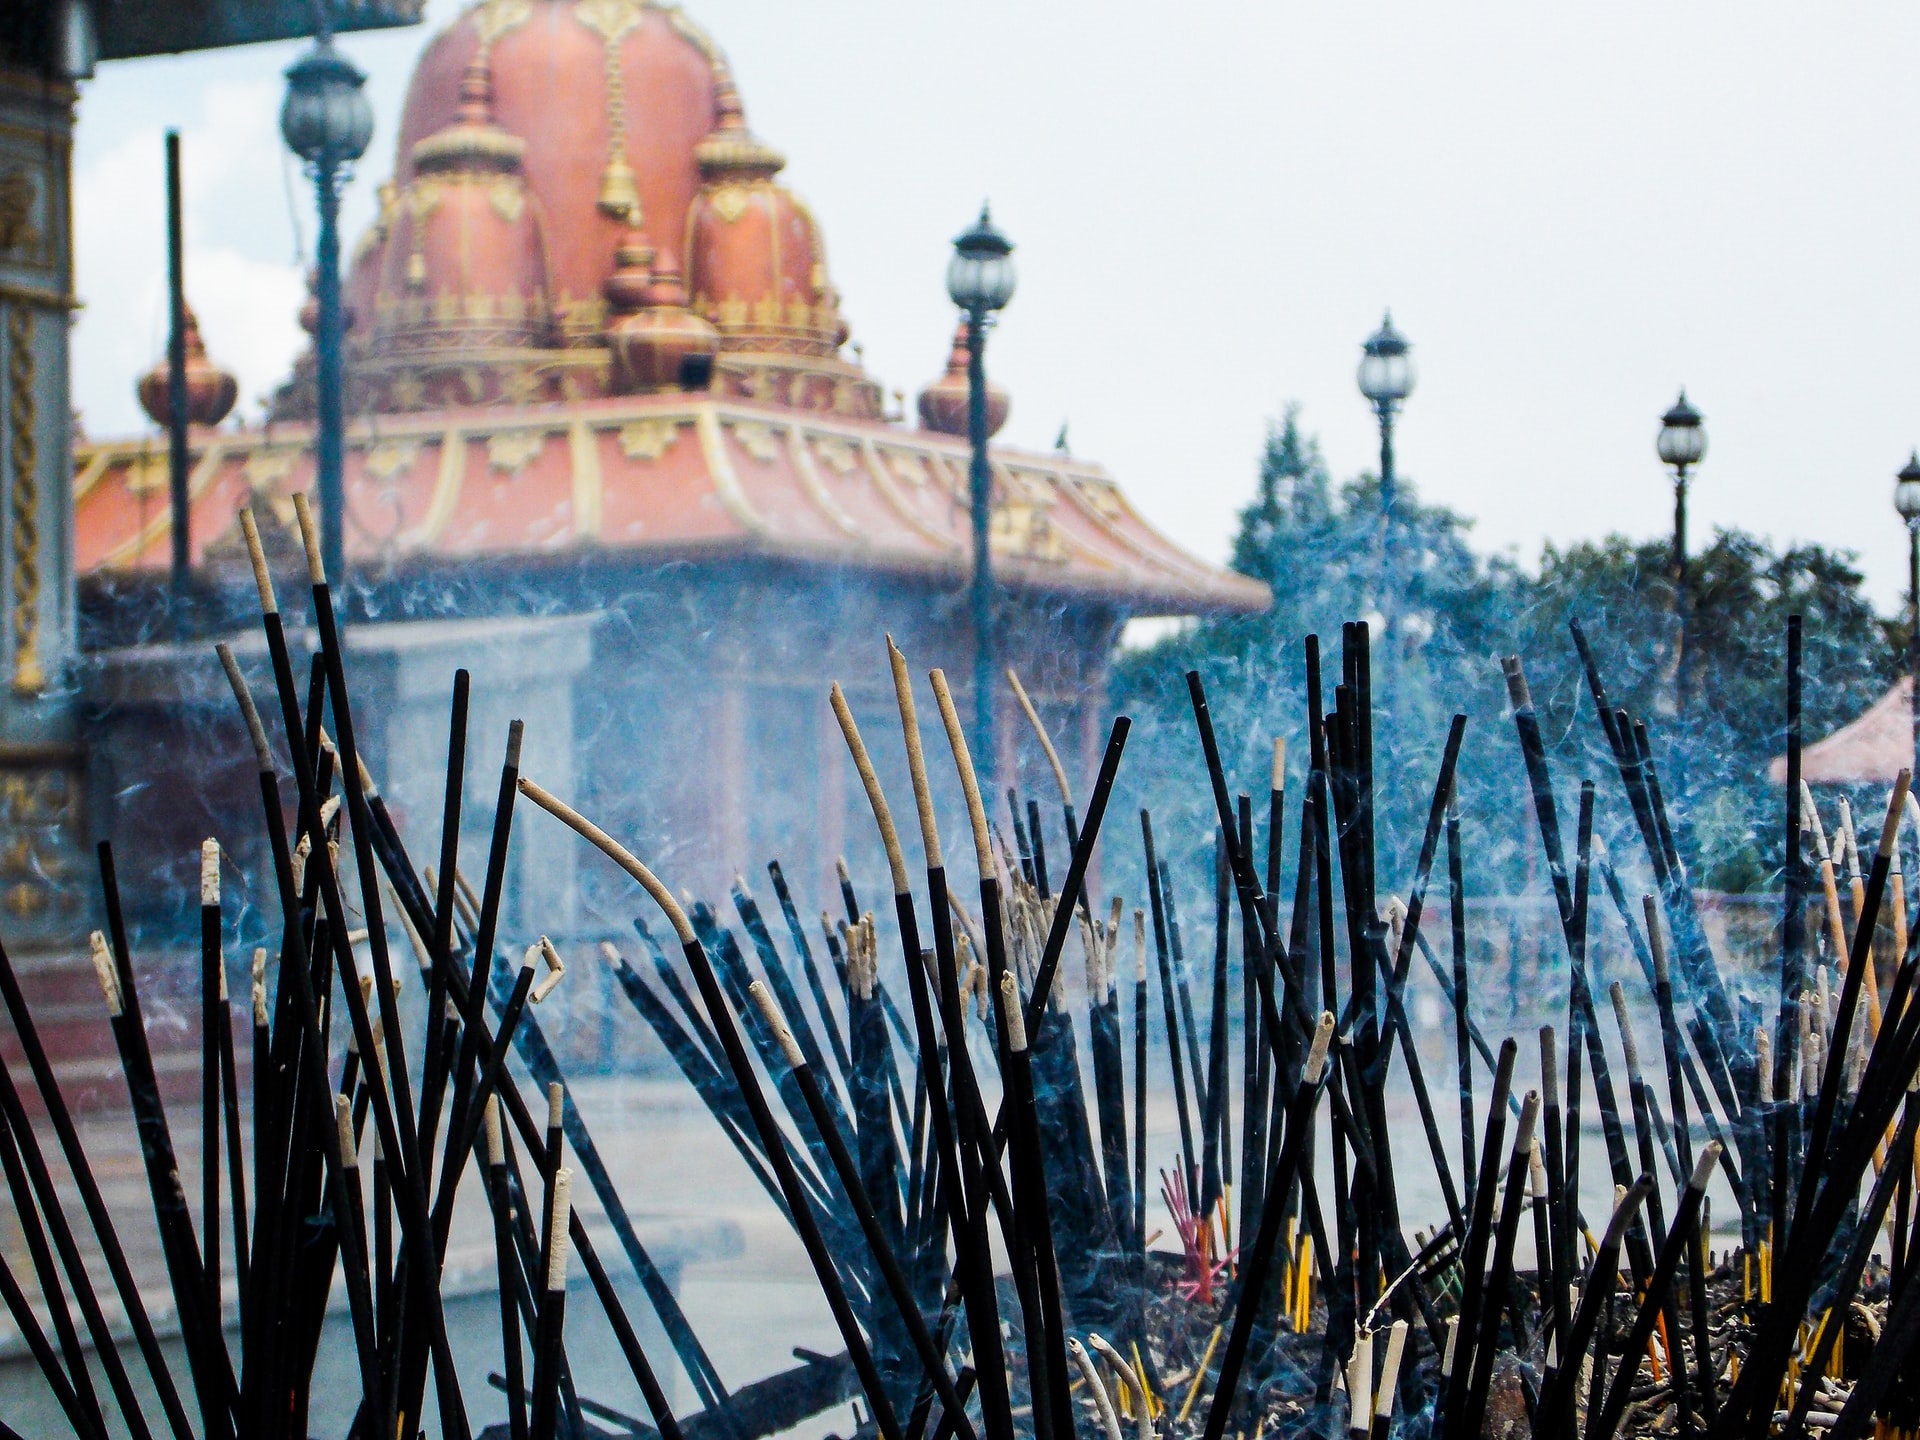 Incense burning with ancient smells in front of a Buddhist temple